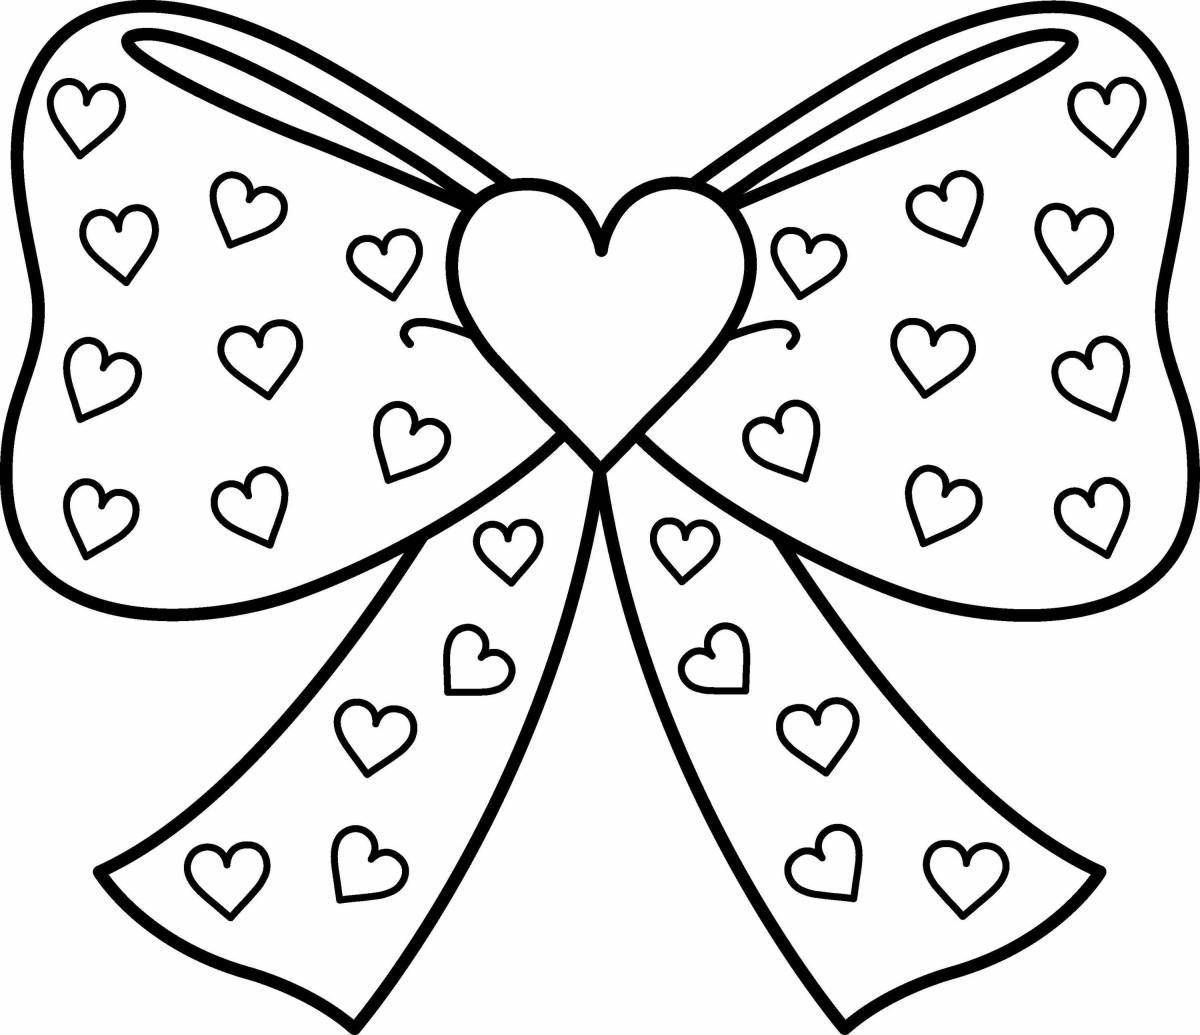 Whimsical heart coloring for 3-4 year olds